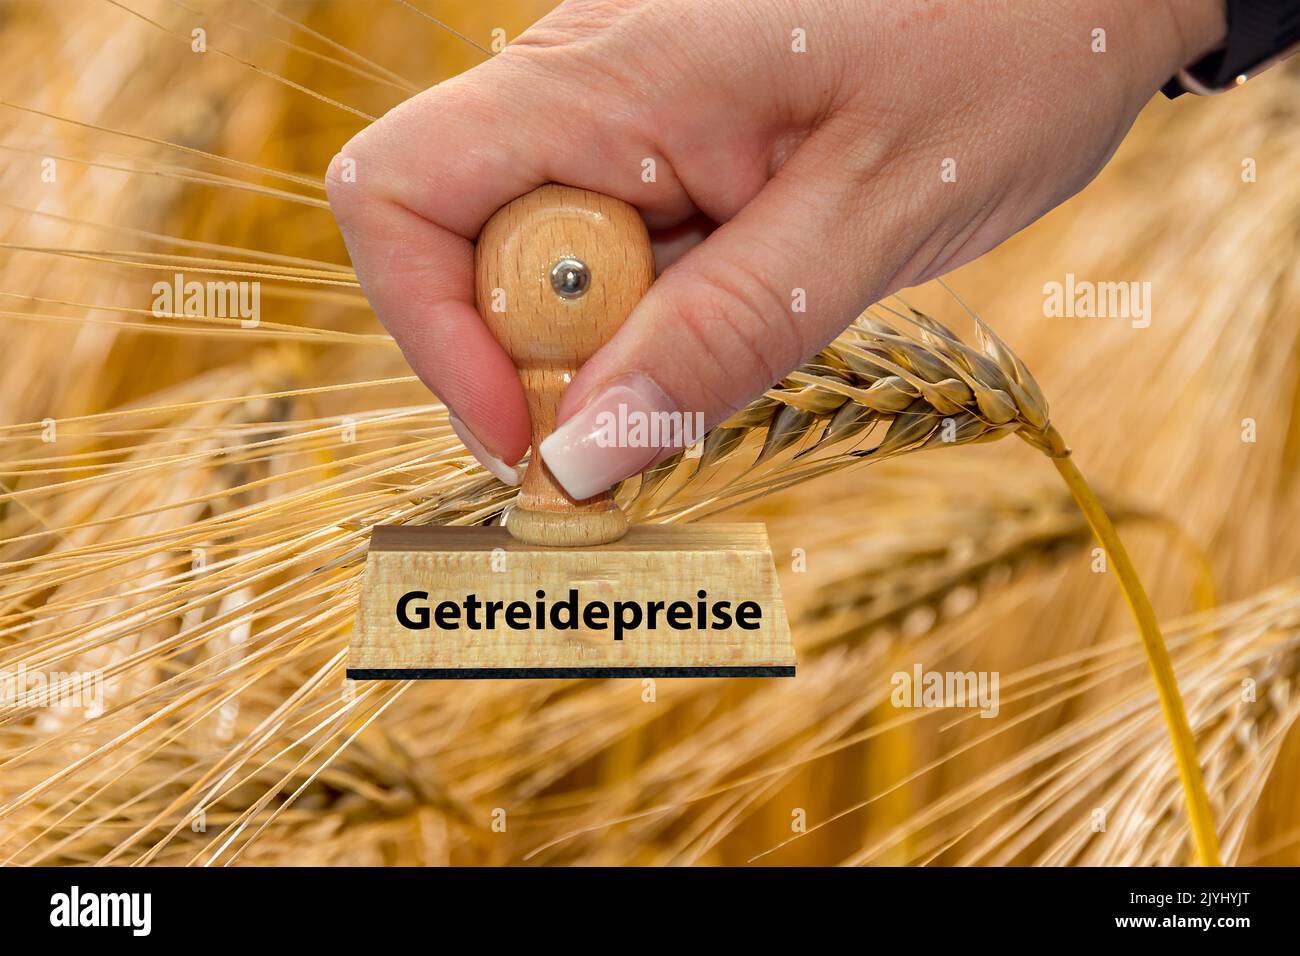 woman's hand with stamp lettering Getreidepreise, price of grains, grain field in background, Germany Stock Photo